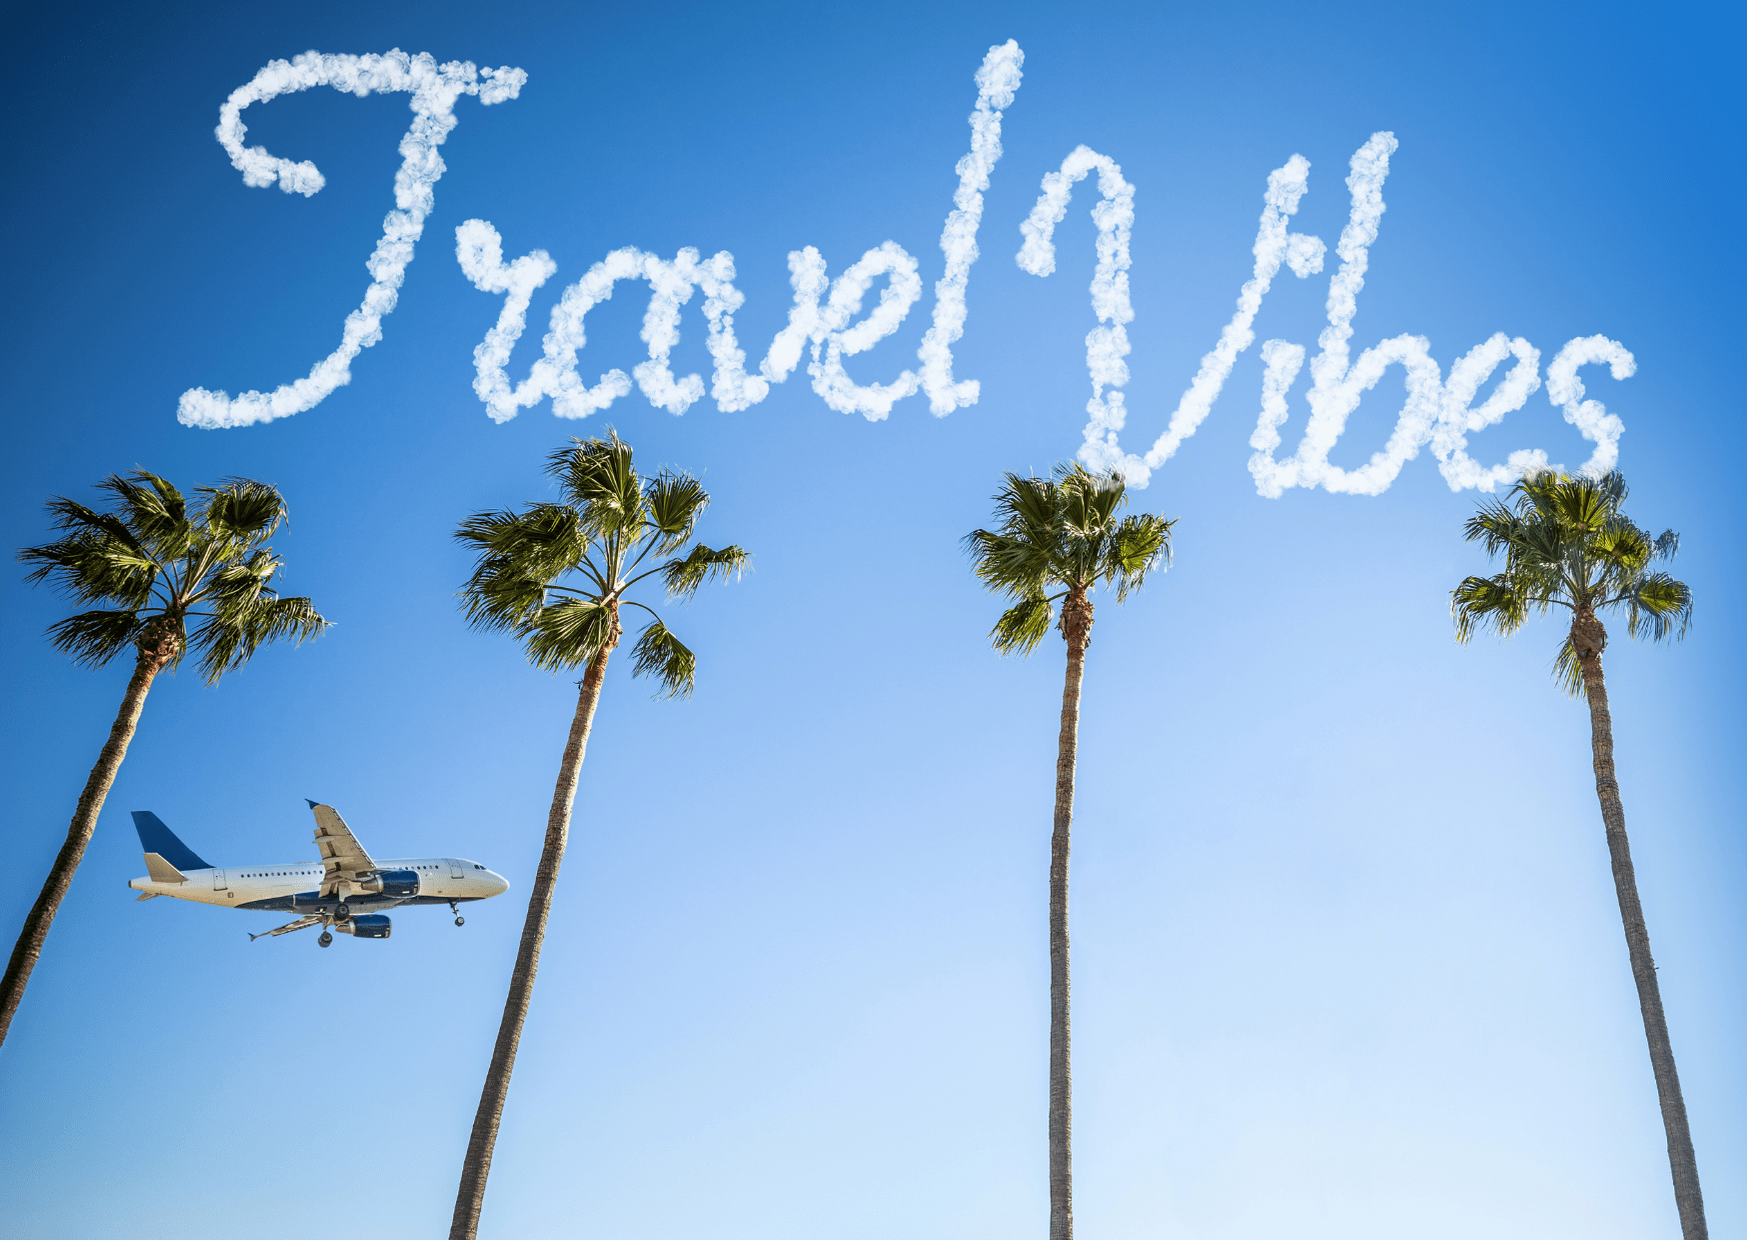 What's your 2021 Travel Vibe?